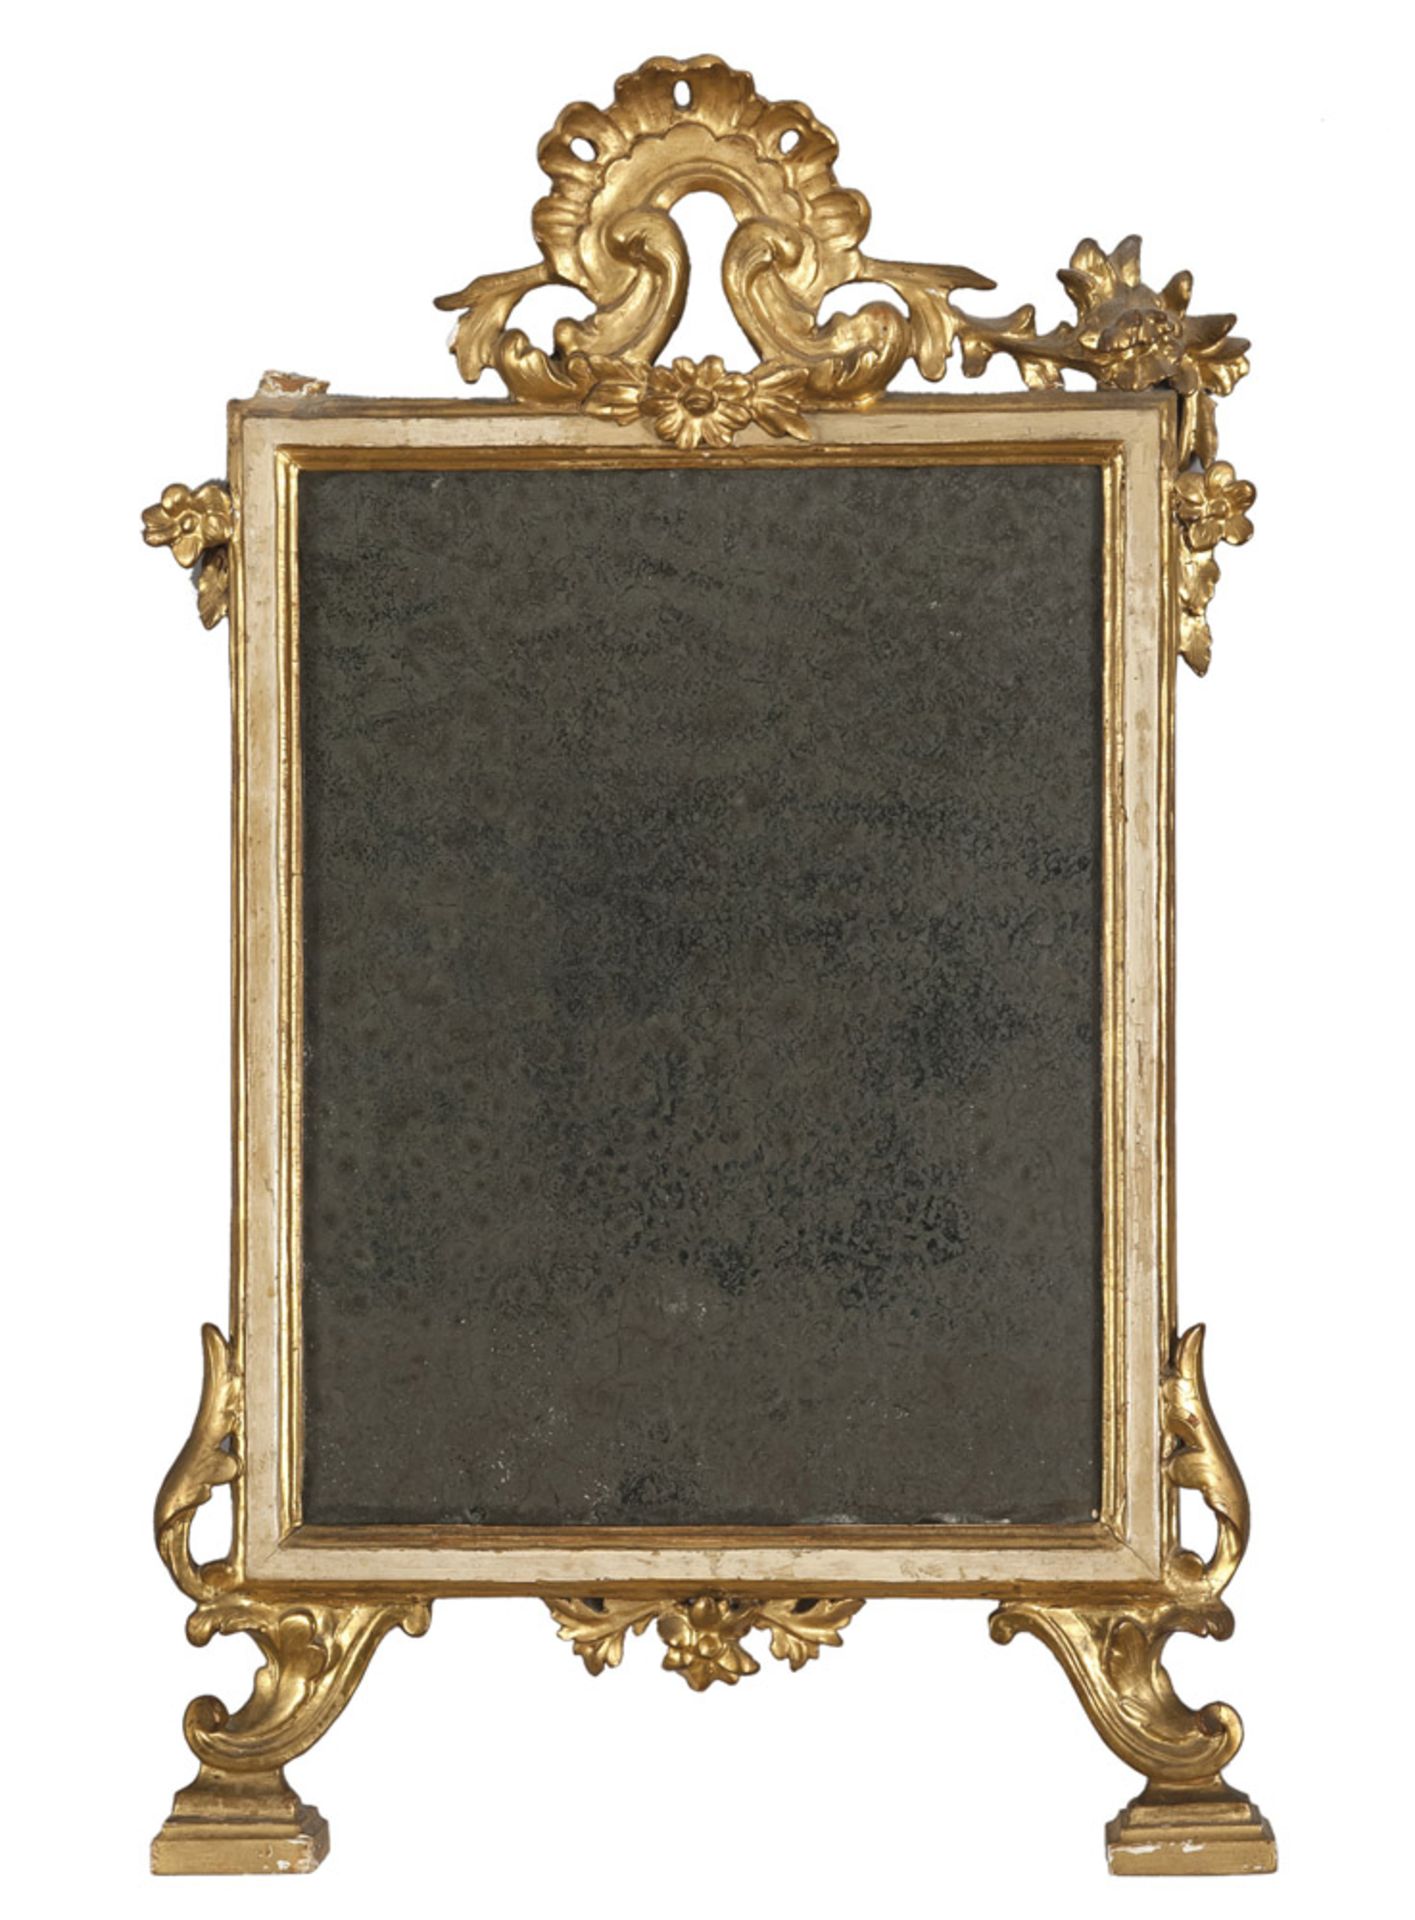 Giltwood and white lacquered mirror, probably Naples 18th century. Measures cm. 60 x 36.PICCOLA